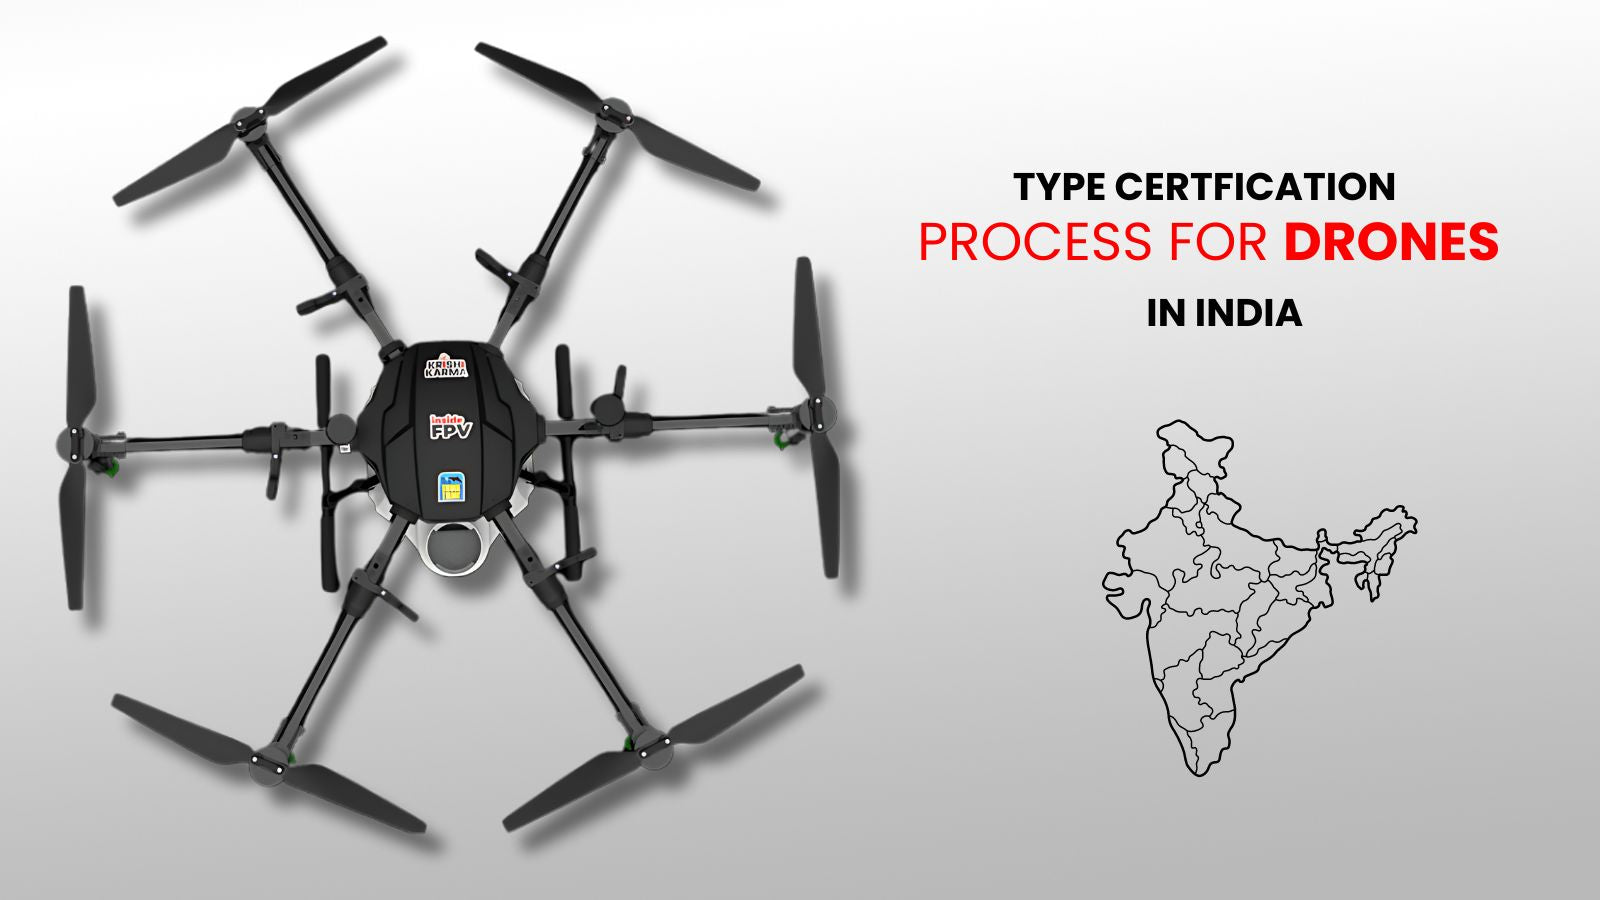 How to Get Your Drone Certified: A Simple Guide to Type Certification Process for Drones in India